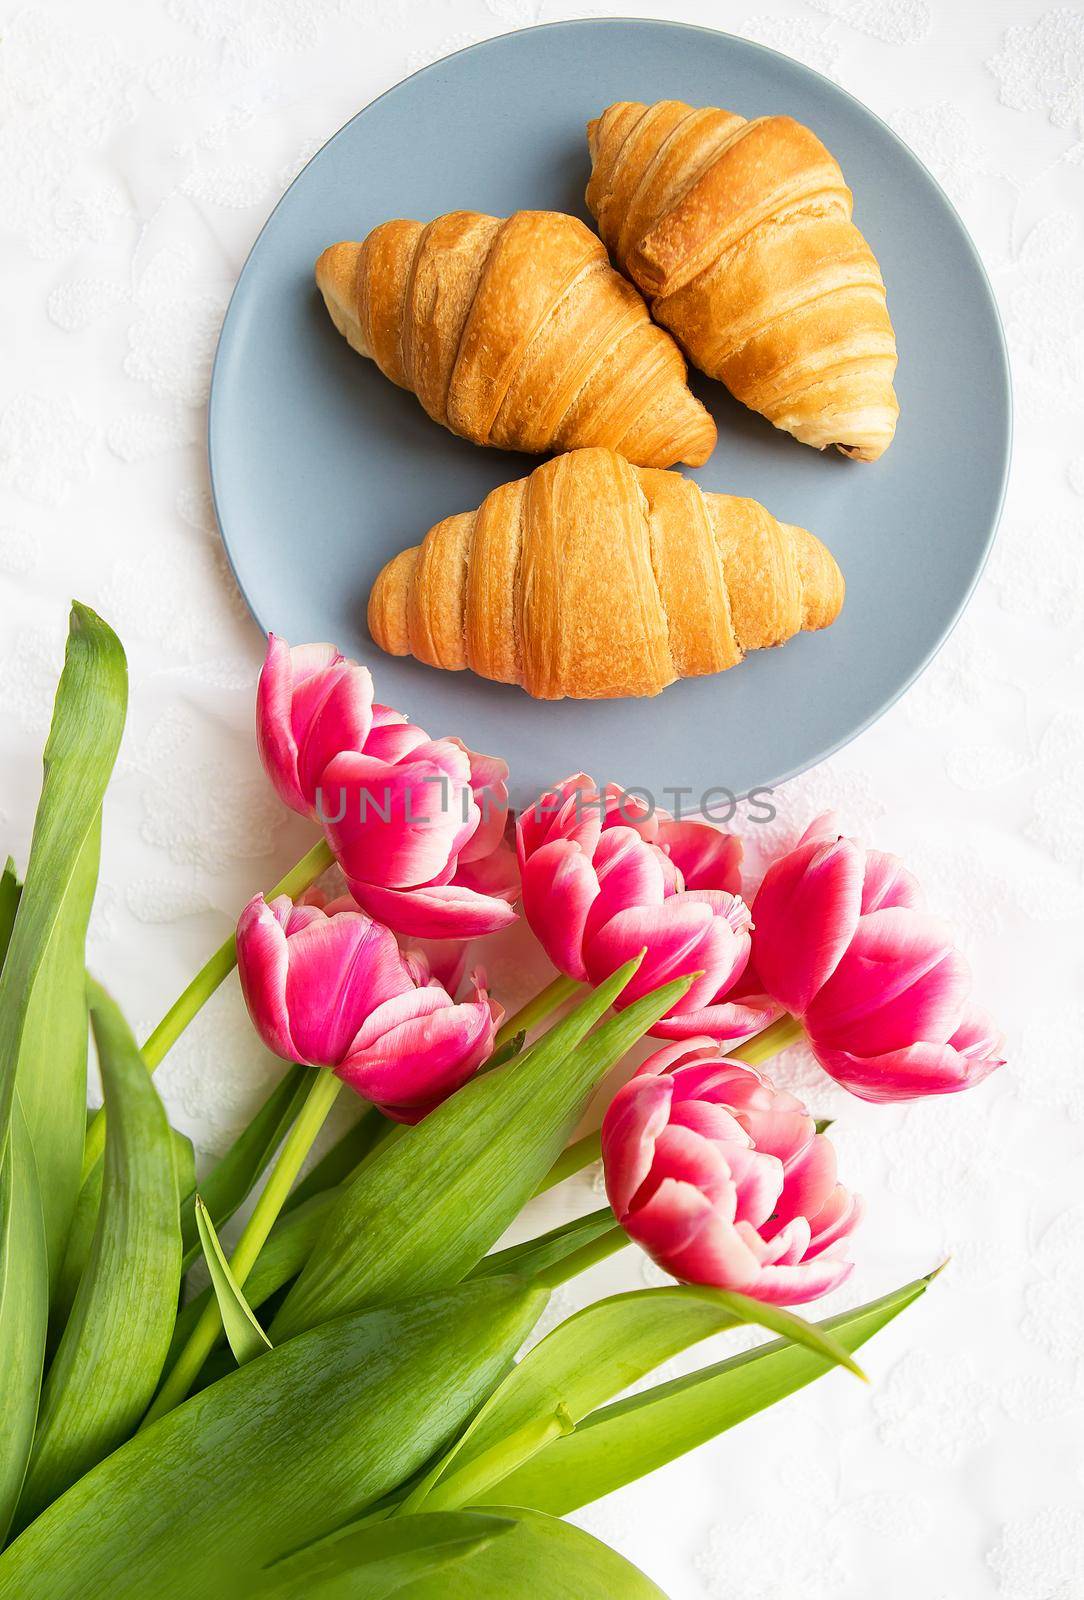 croissants on the background of laces on a white background with a bouquet of pink tulips.